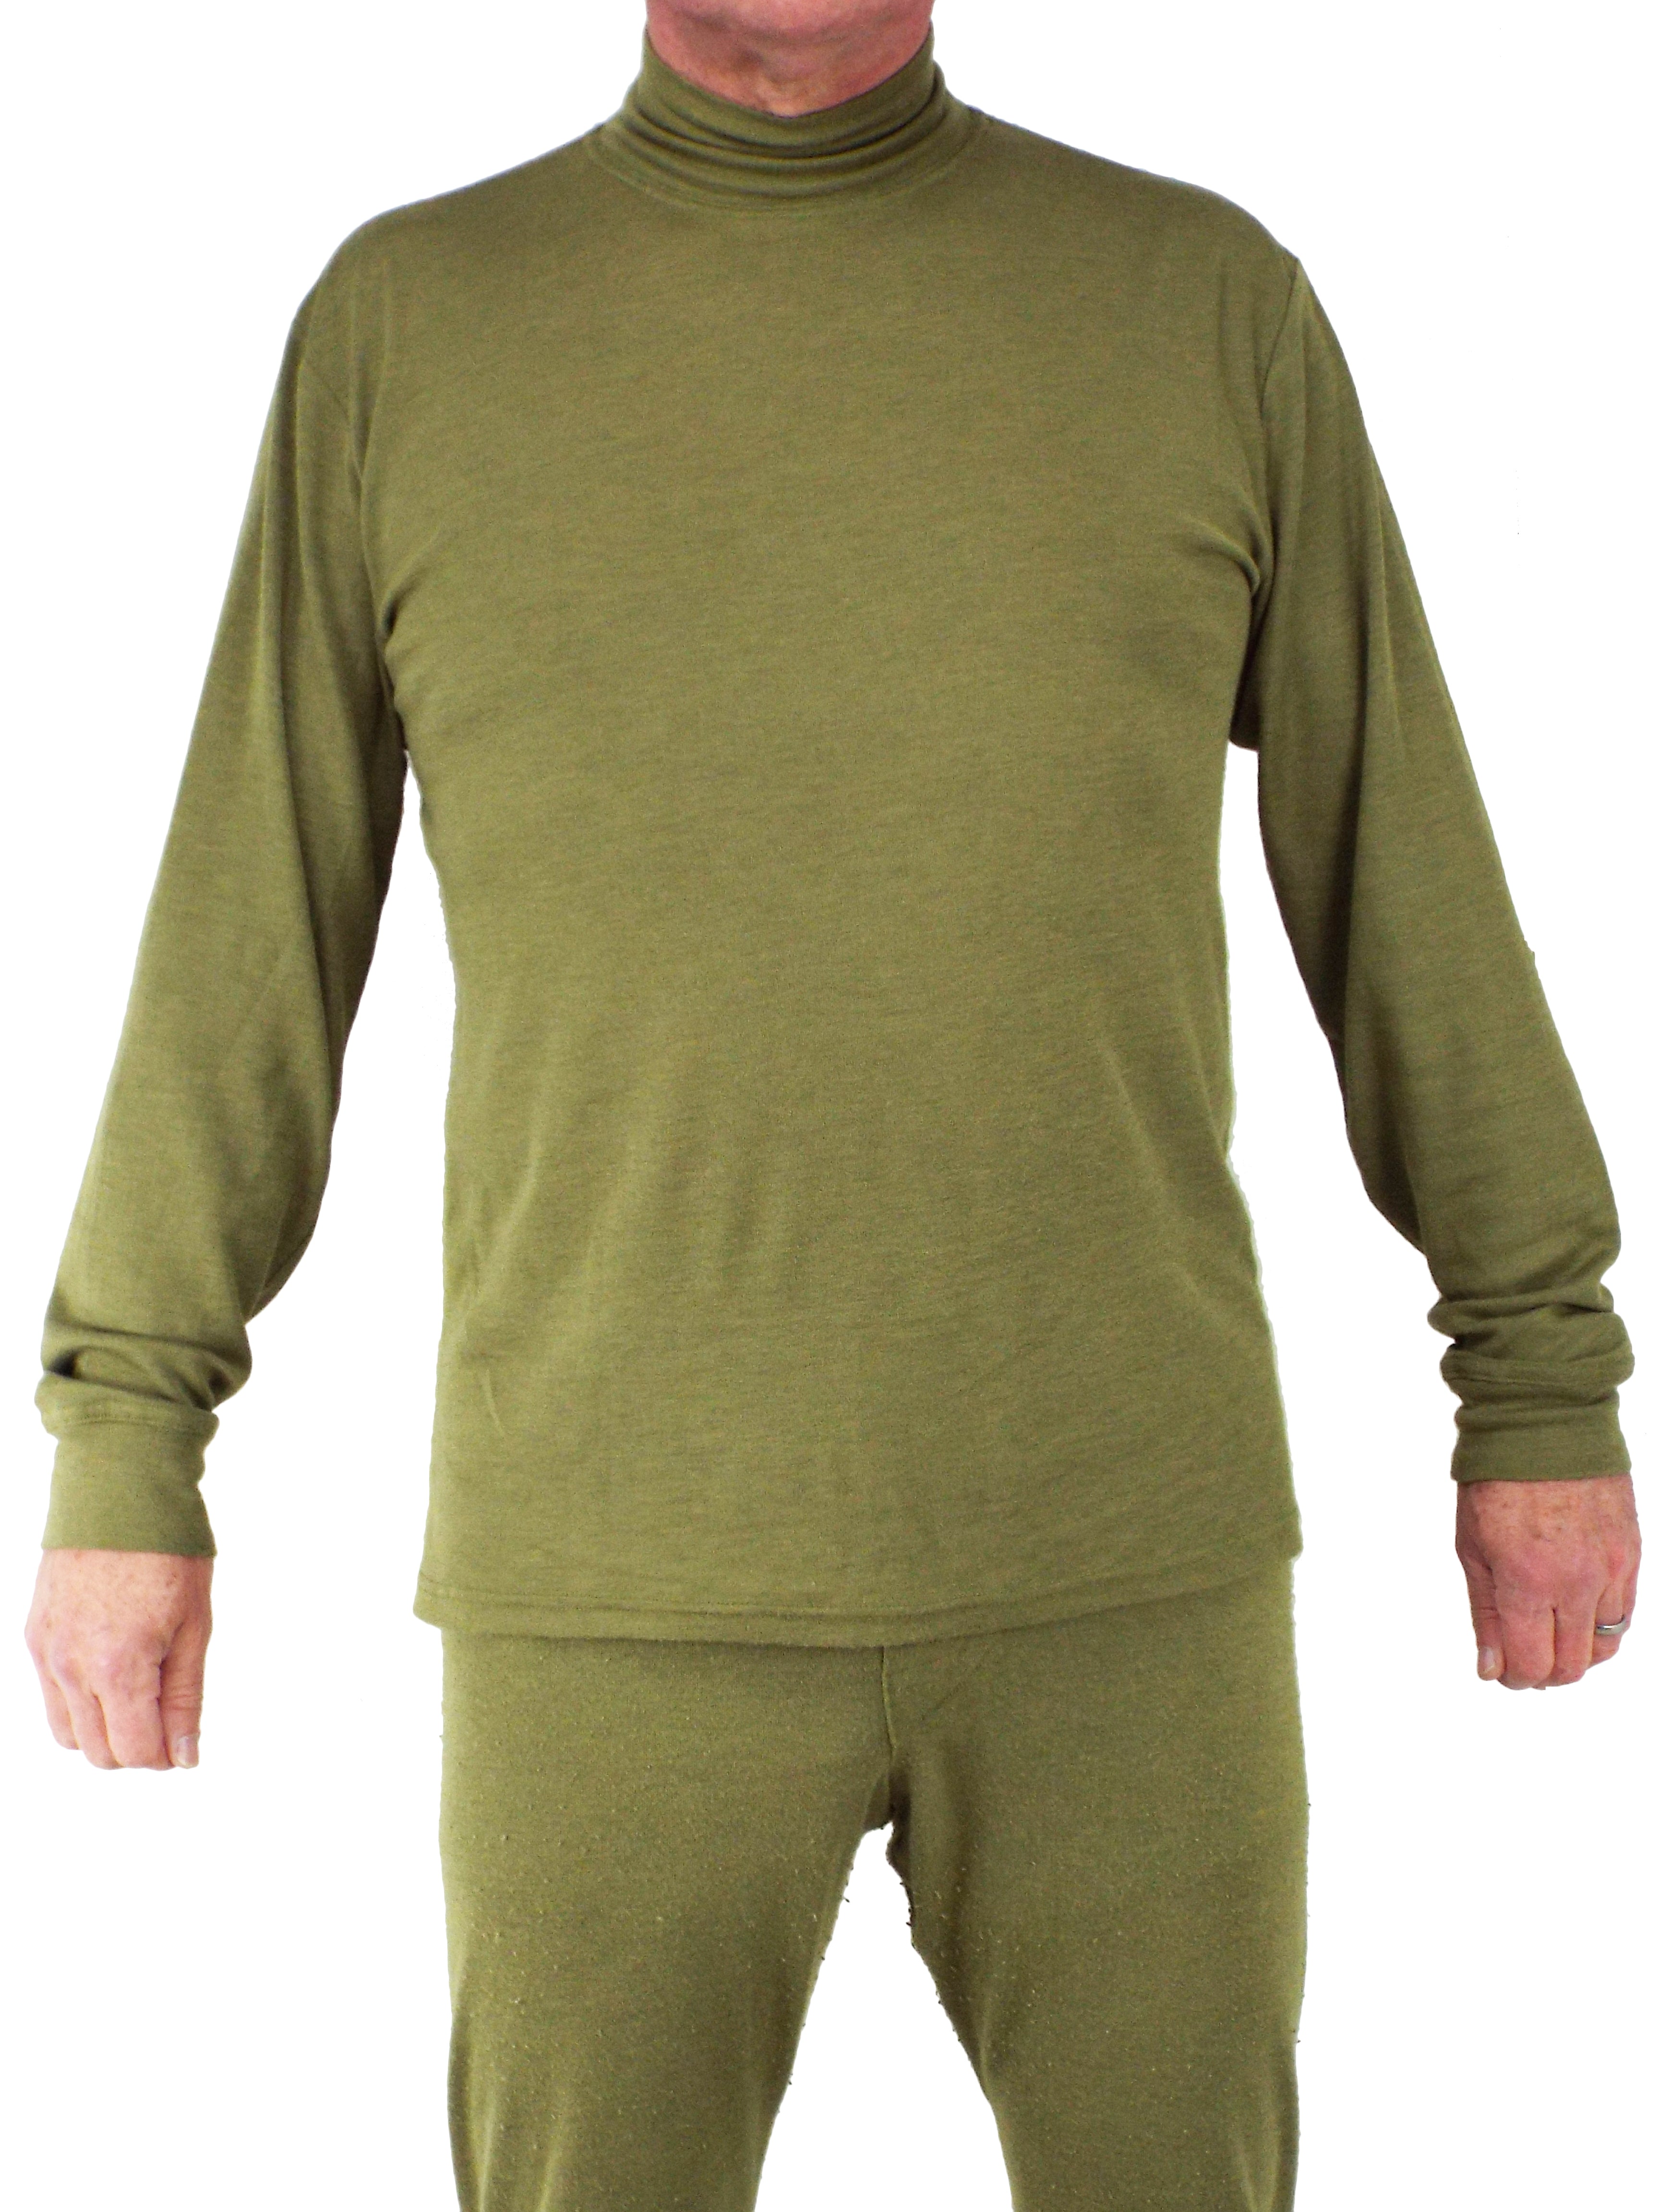 British Army - Long Sleeve Thermal Top - Light Olive - Base layer - Gr -  Forces Uniform and Kit